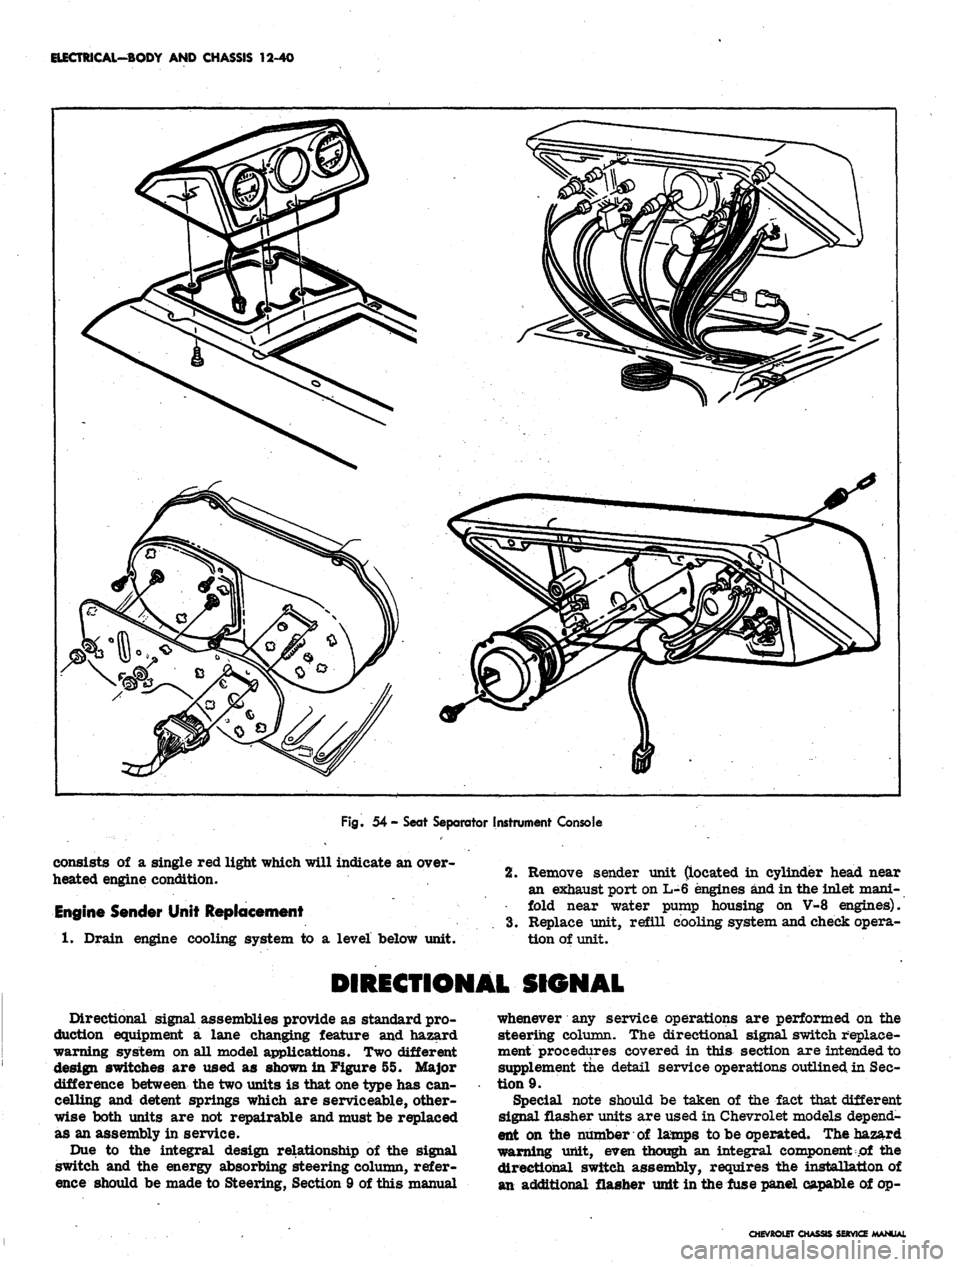 CHEVROLET CAMARO 1967 1.G Chassis Workshop Manual 
ELECTRICAL-BODY AND CHASSIS 12-40

Fig.
 54 - Seat Separator Instrument Console

consists of a single red light which will indicate an over-

heated engine condition.

Engine Sender Unit Replacement
